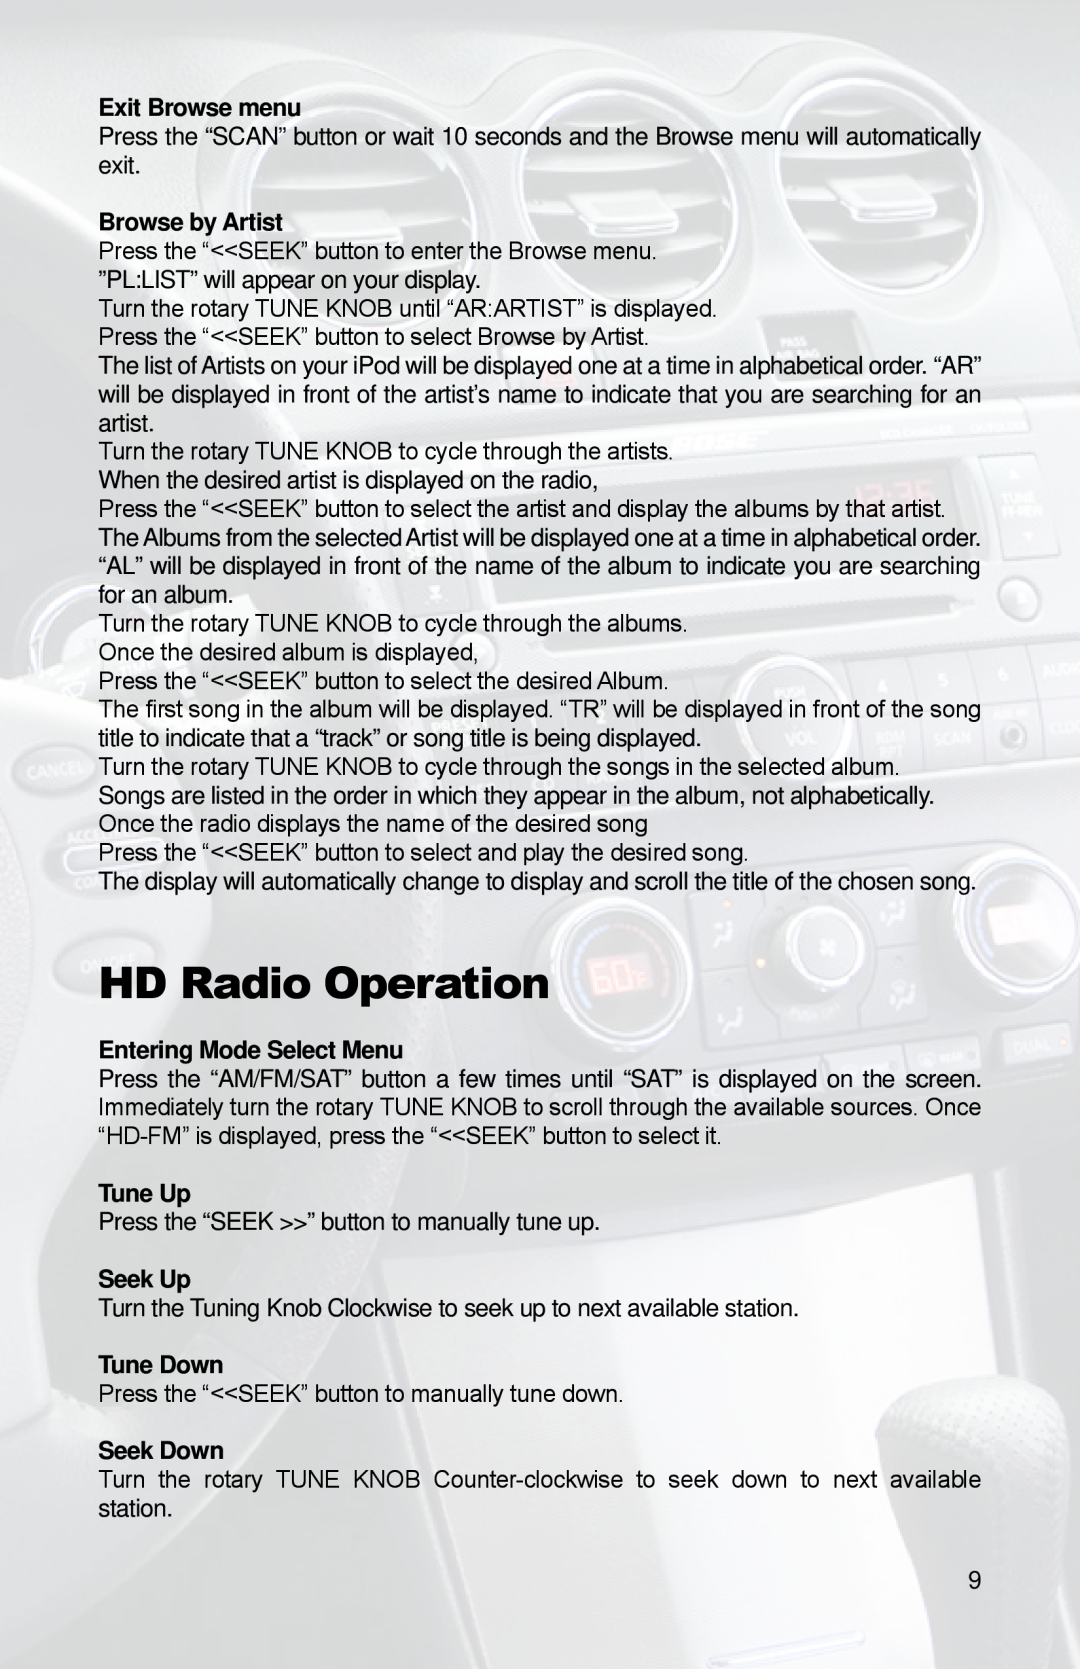 iSimple PGHNI2 owner manual HD Radio Operation, When the desired artist is displayed on the radio 